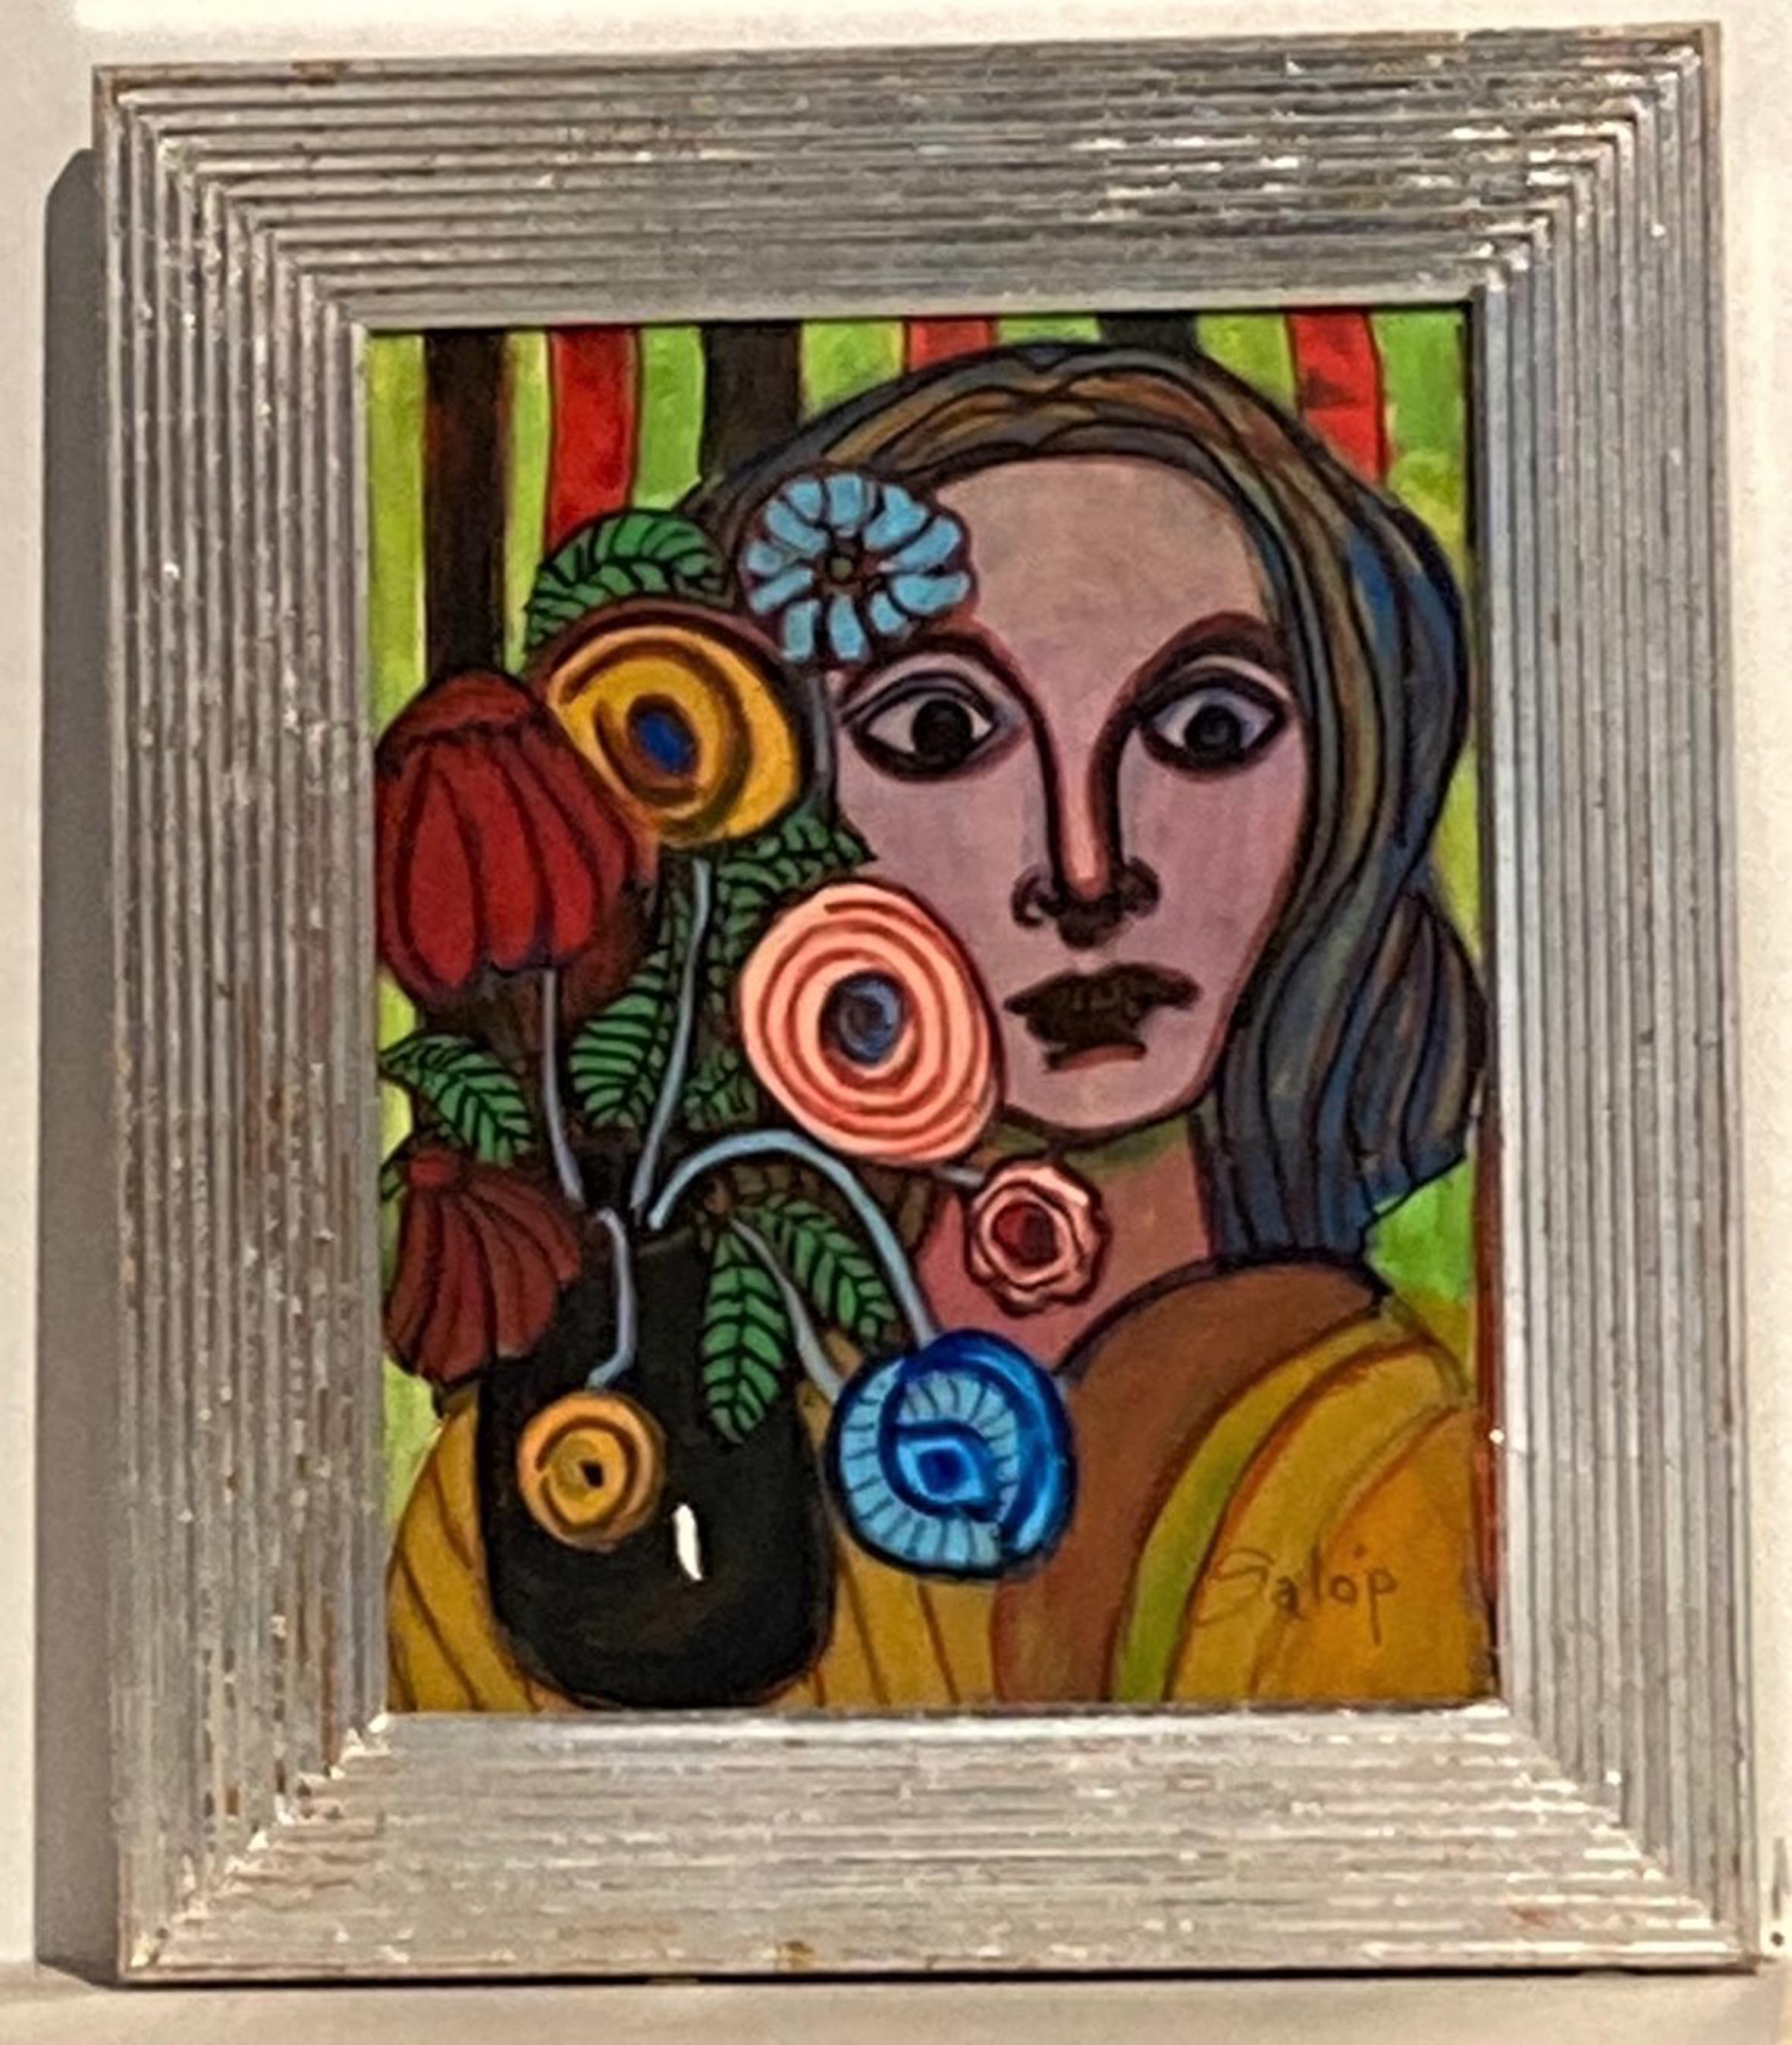 Woman in Love With Flowers - Painting by Salop'- Ed Ryman